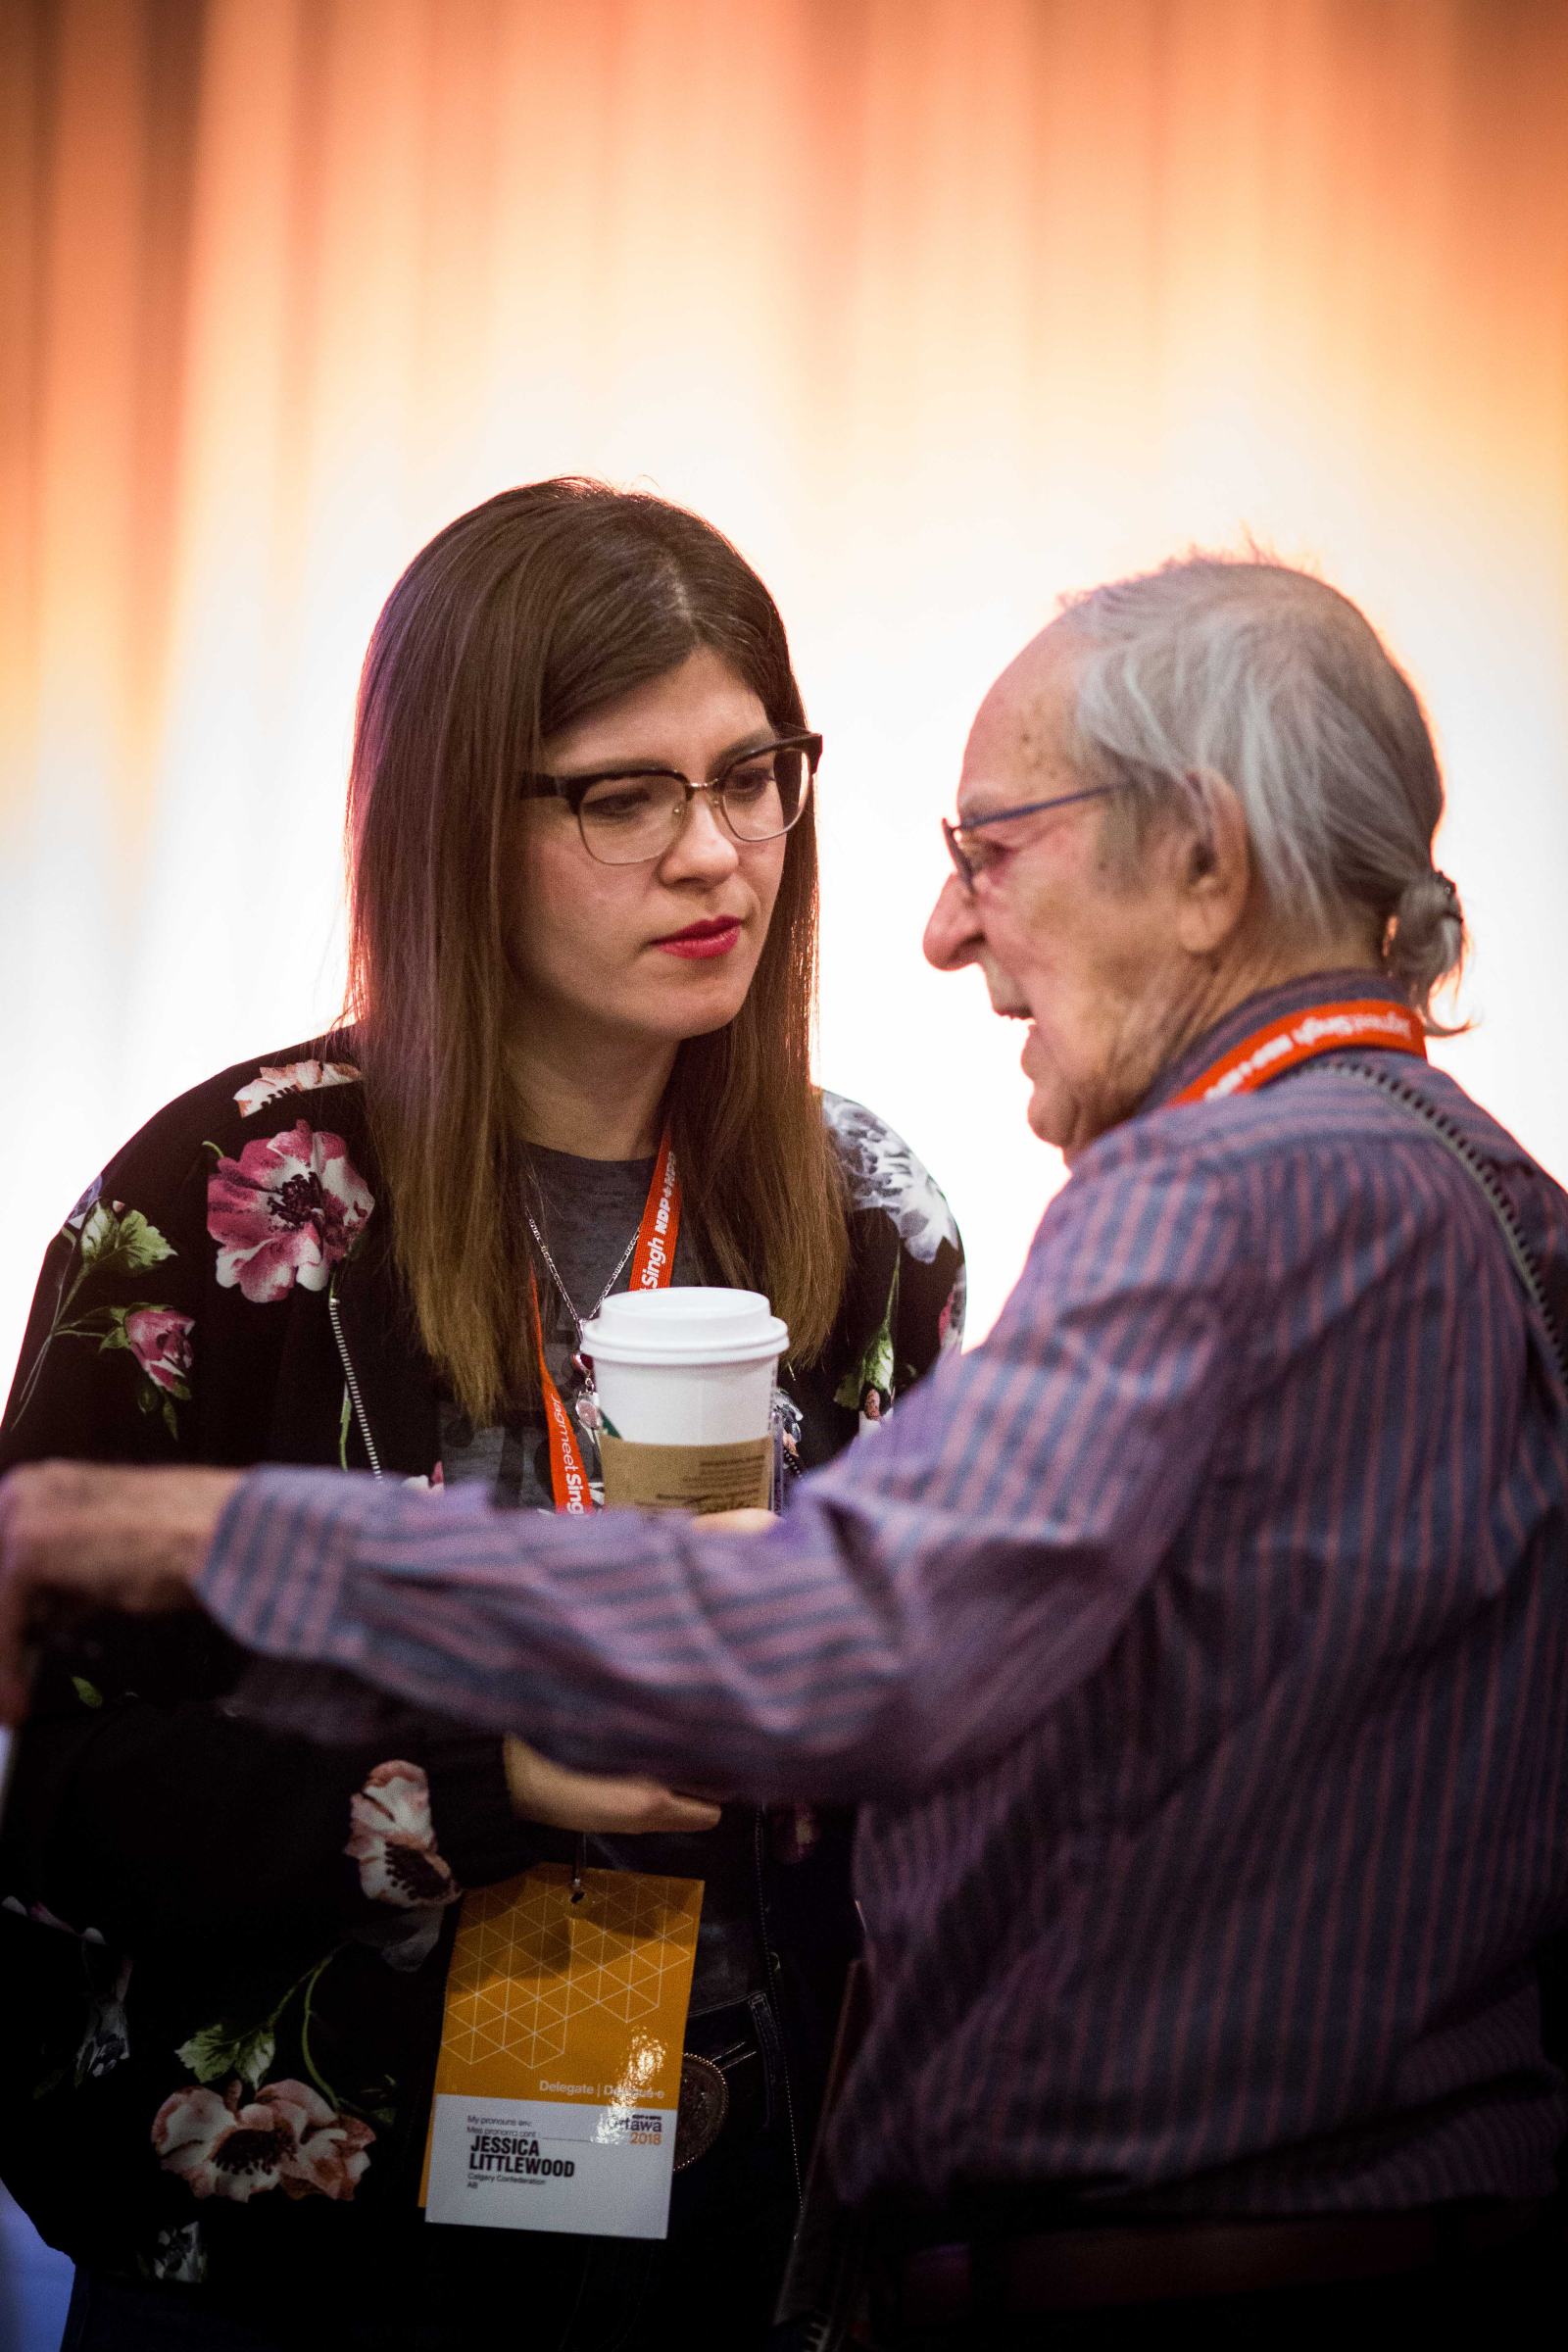 Alberta MLA Jessica Littlewood talks to a fellow NDP delegate at the party's national convention in Ottawa on Feb. 16, 2018. Photo by Alex Tétreault